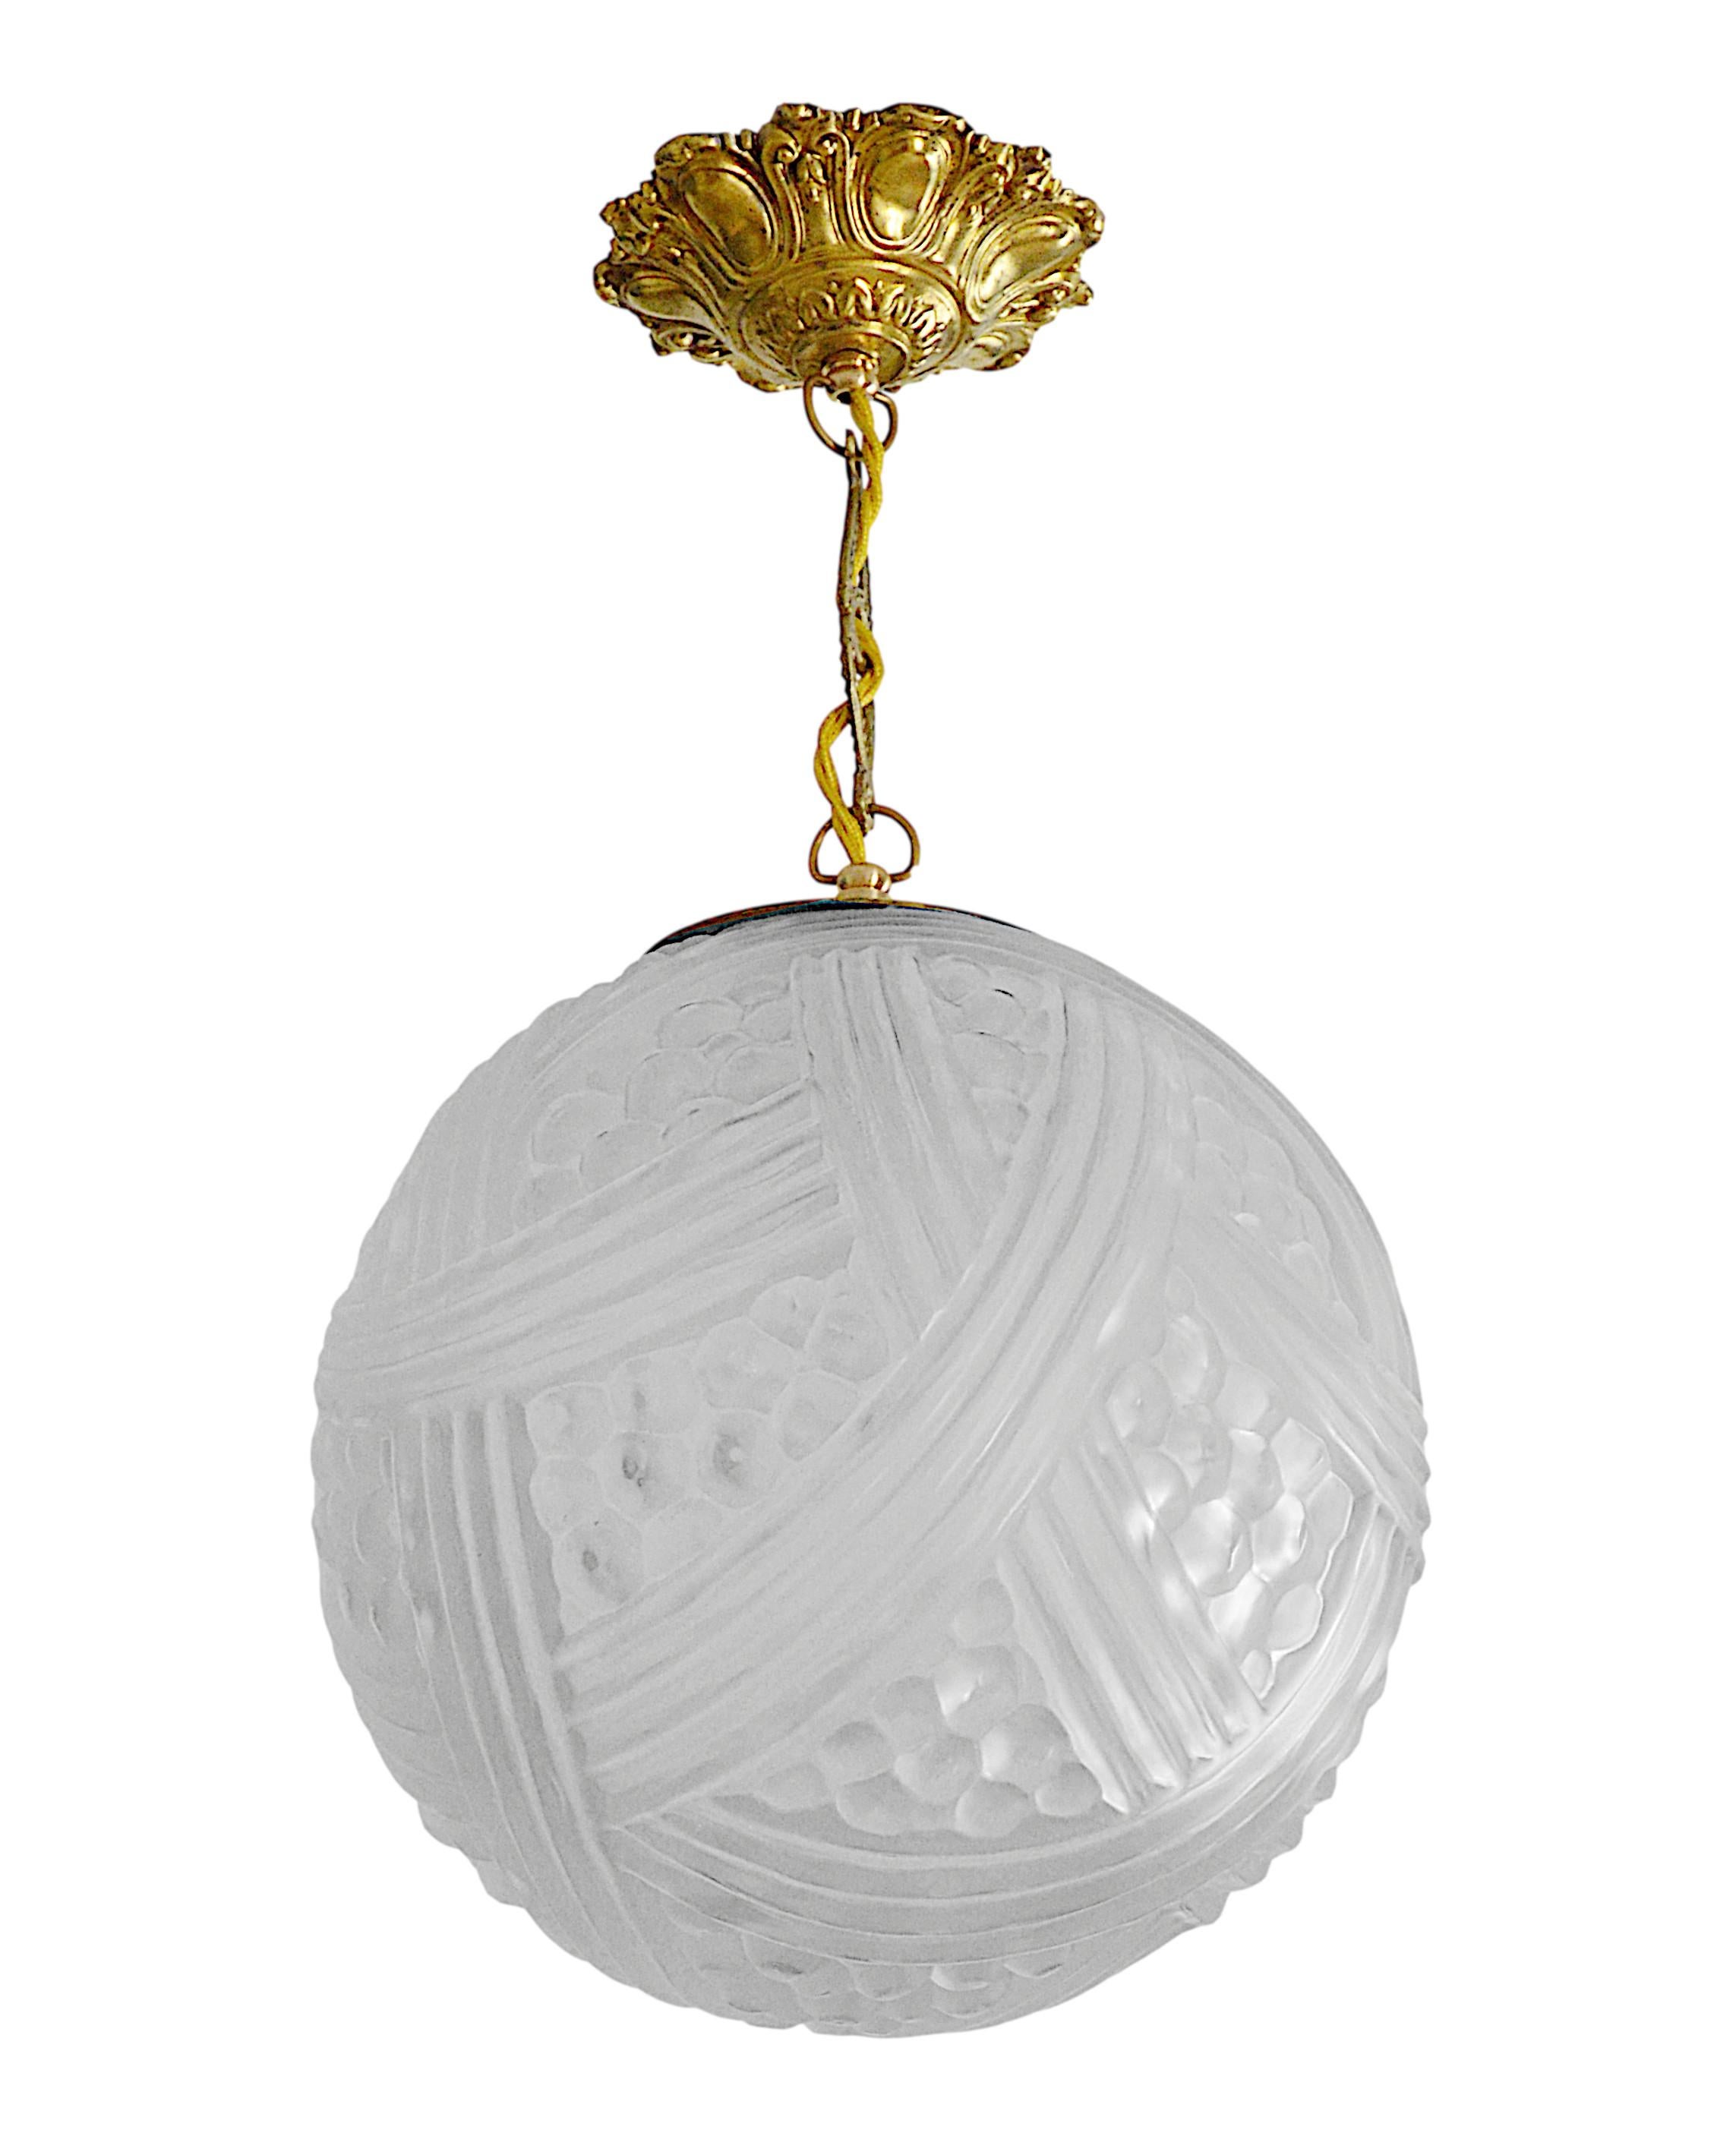 Frosted Hettier & Vincent Pair of French Art Deco Pendant Chandelier, 1925